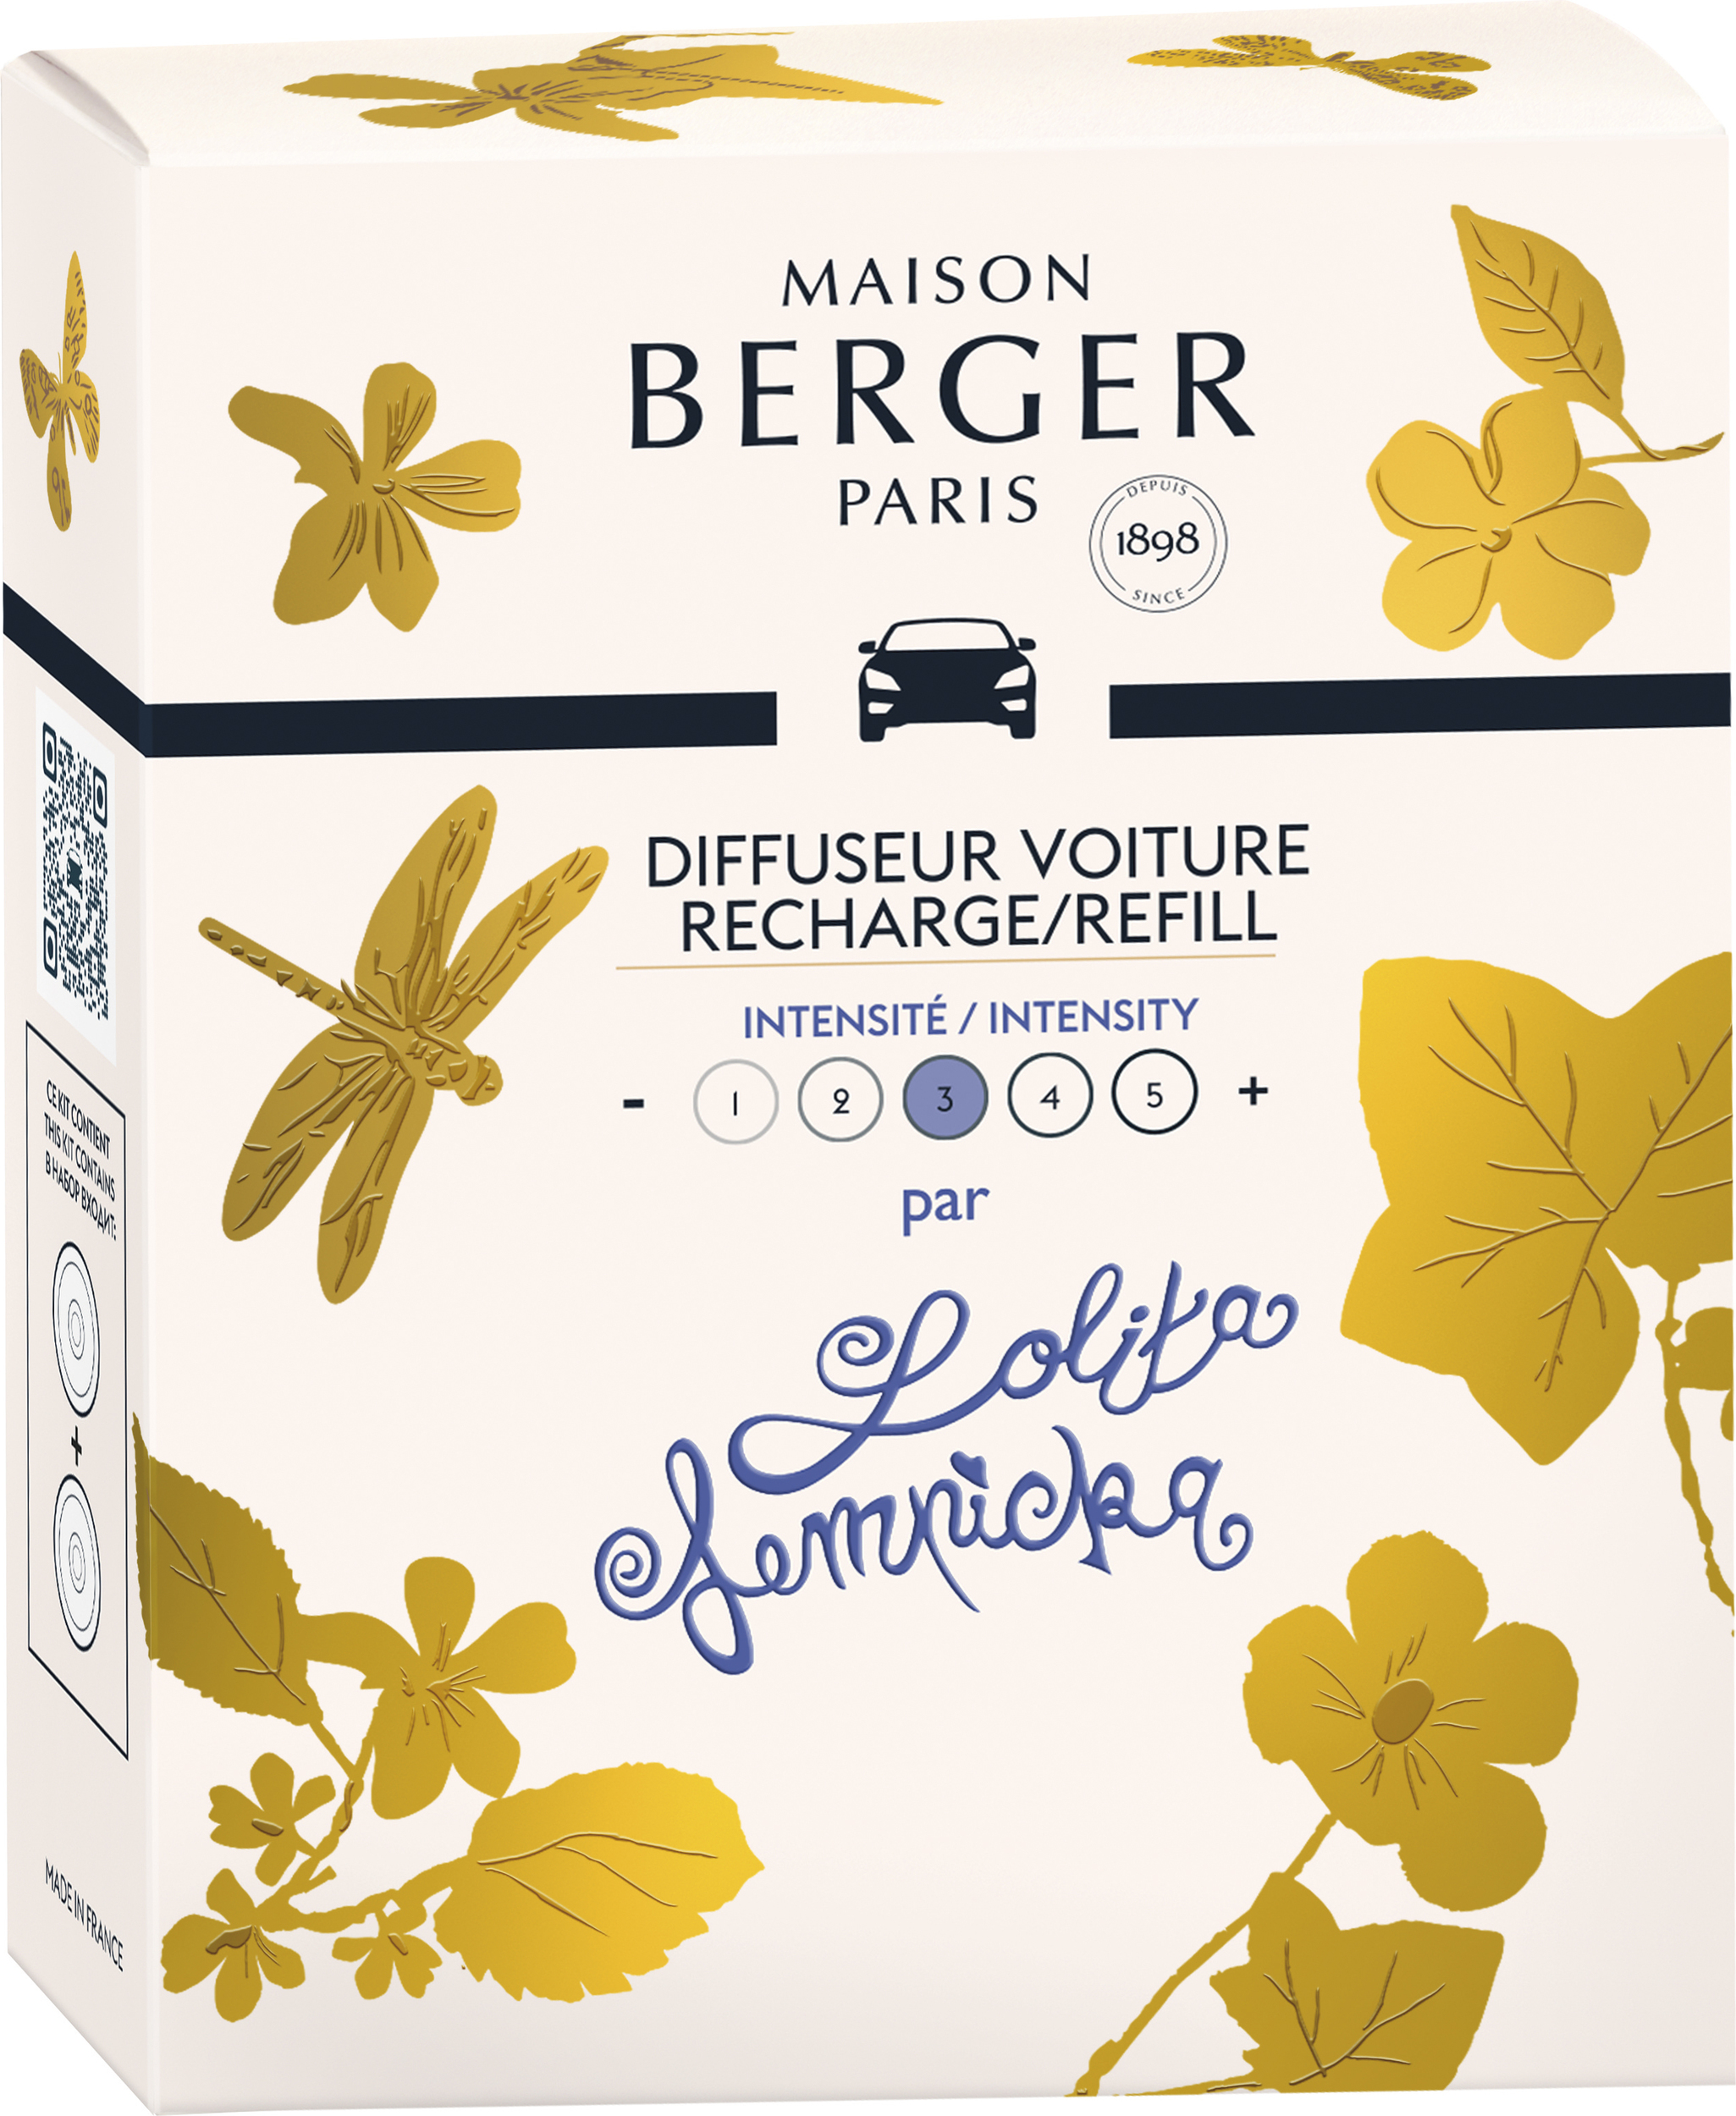 Diffuseur voiture Berger,recharge